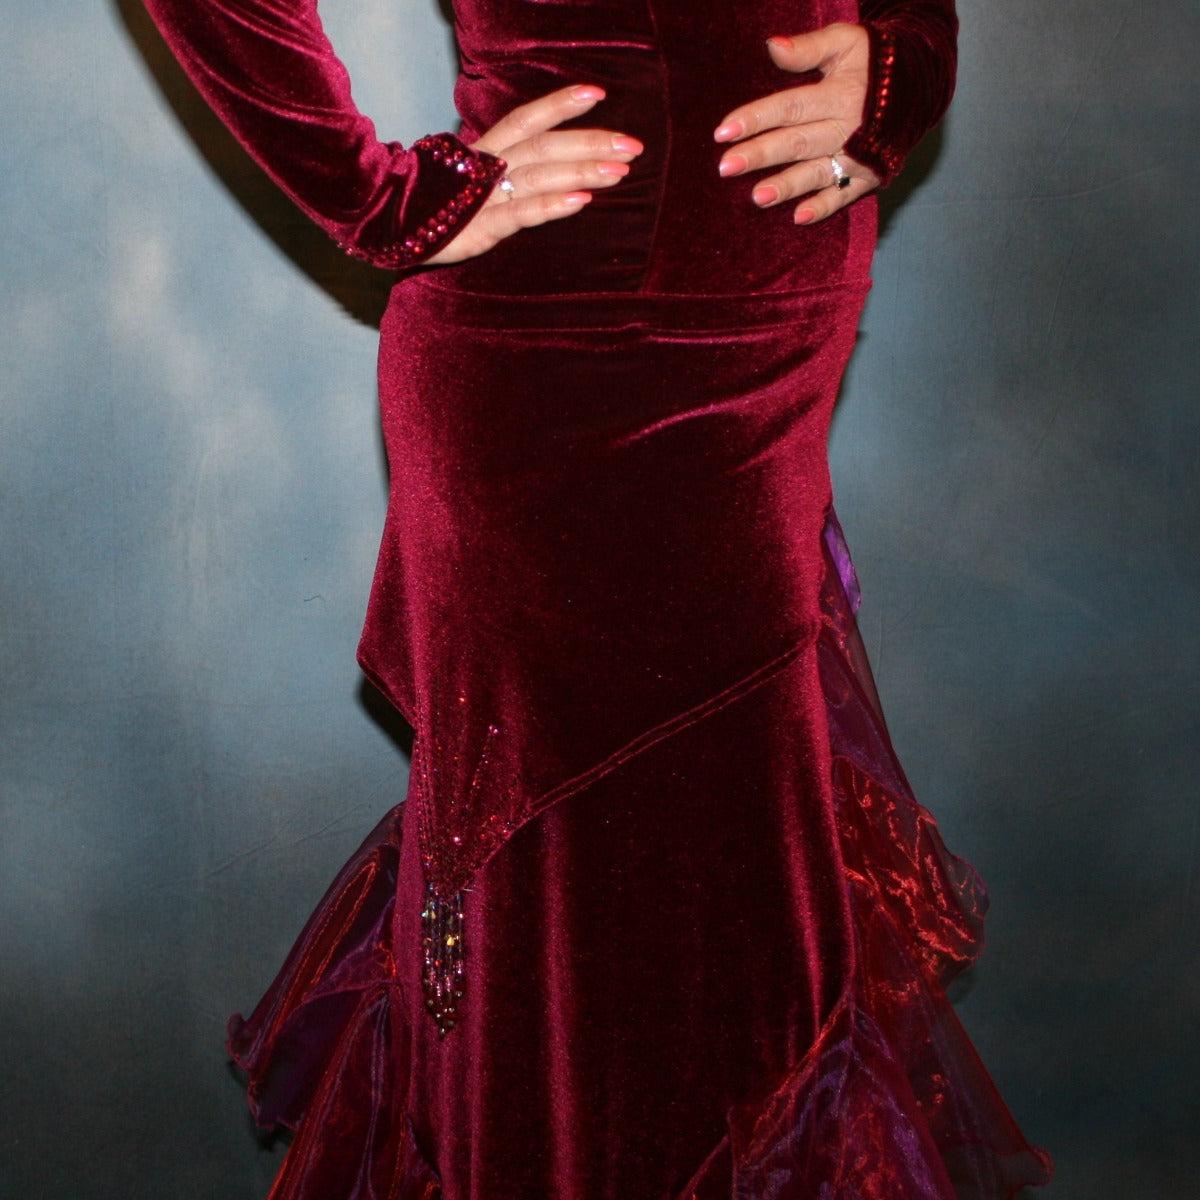 Crystal's Creations lower right view of Burgundy tango dress created in luxurious burgundy stretch velvet, with flounces of iridescent burgundy organza, adorned with fuchsia Swarovski rhinestones, hip sash has Swarovski hand beading as well, just recently embellished more.